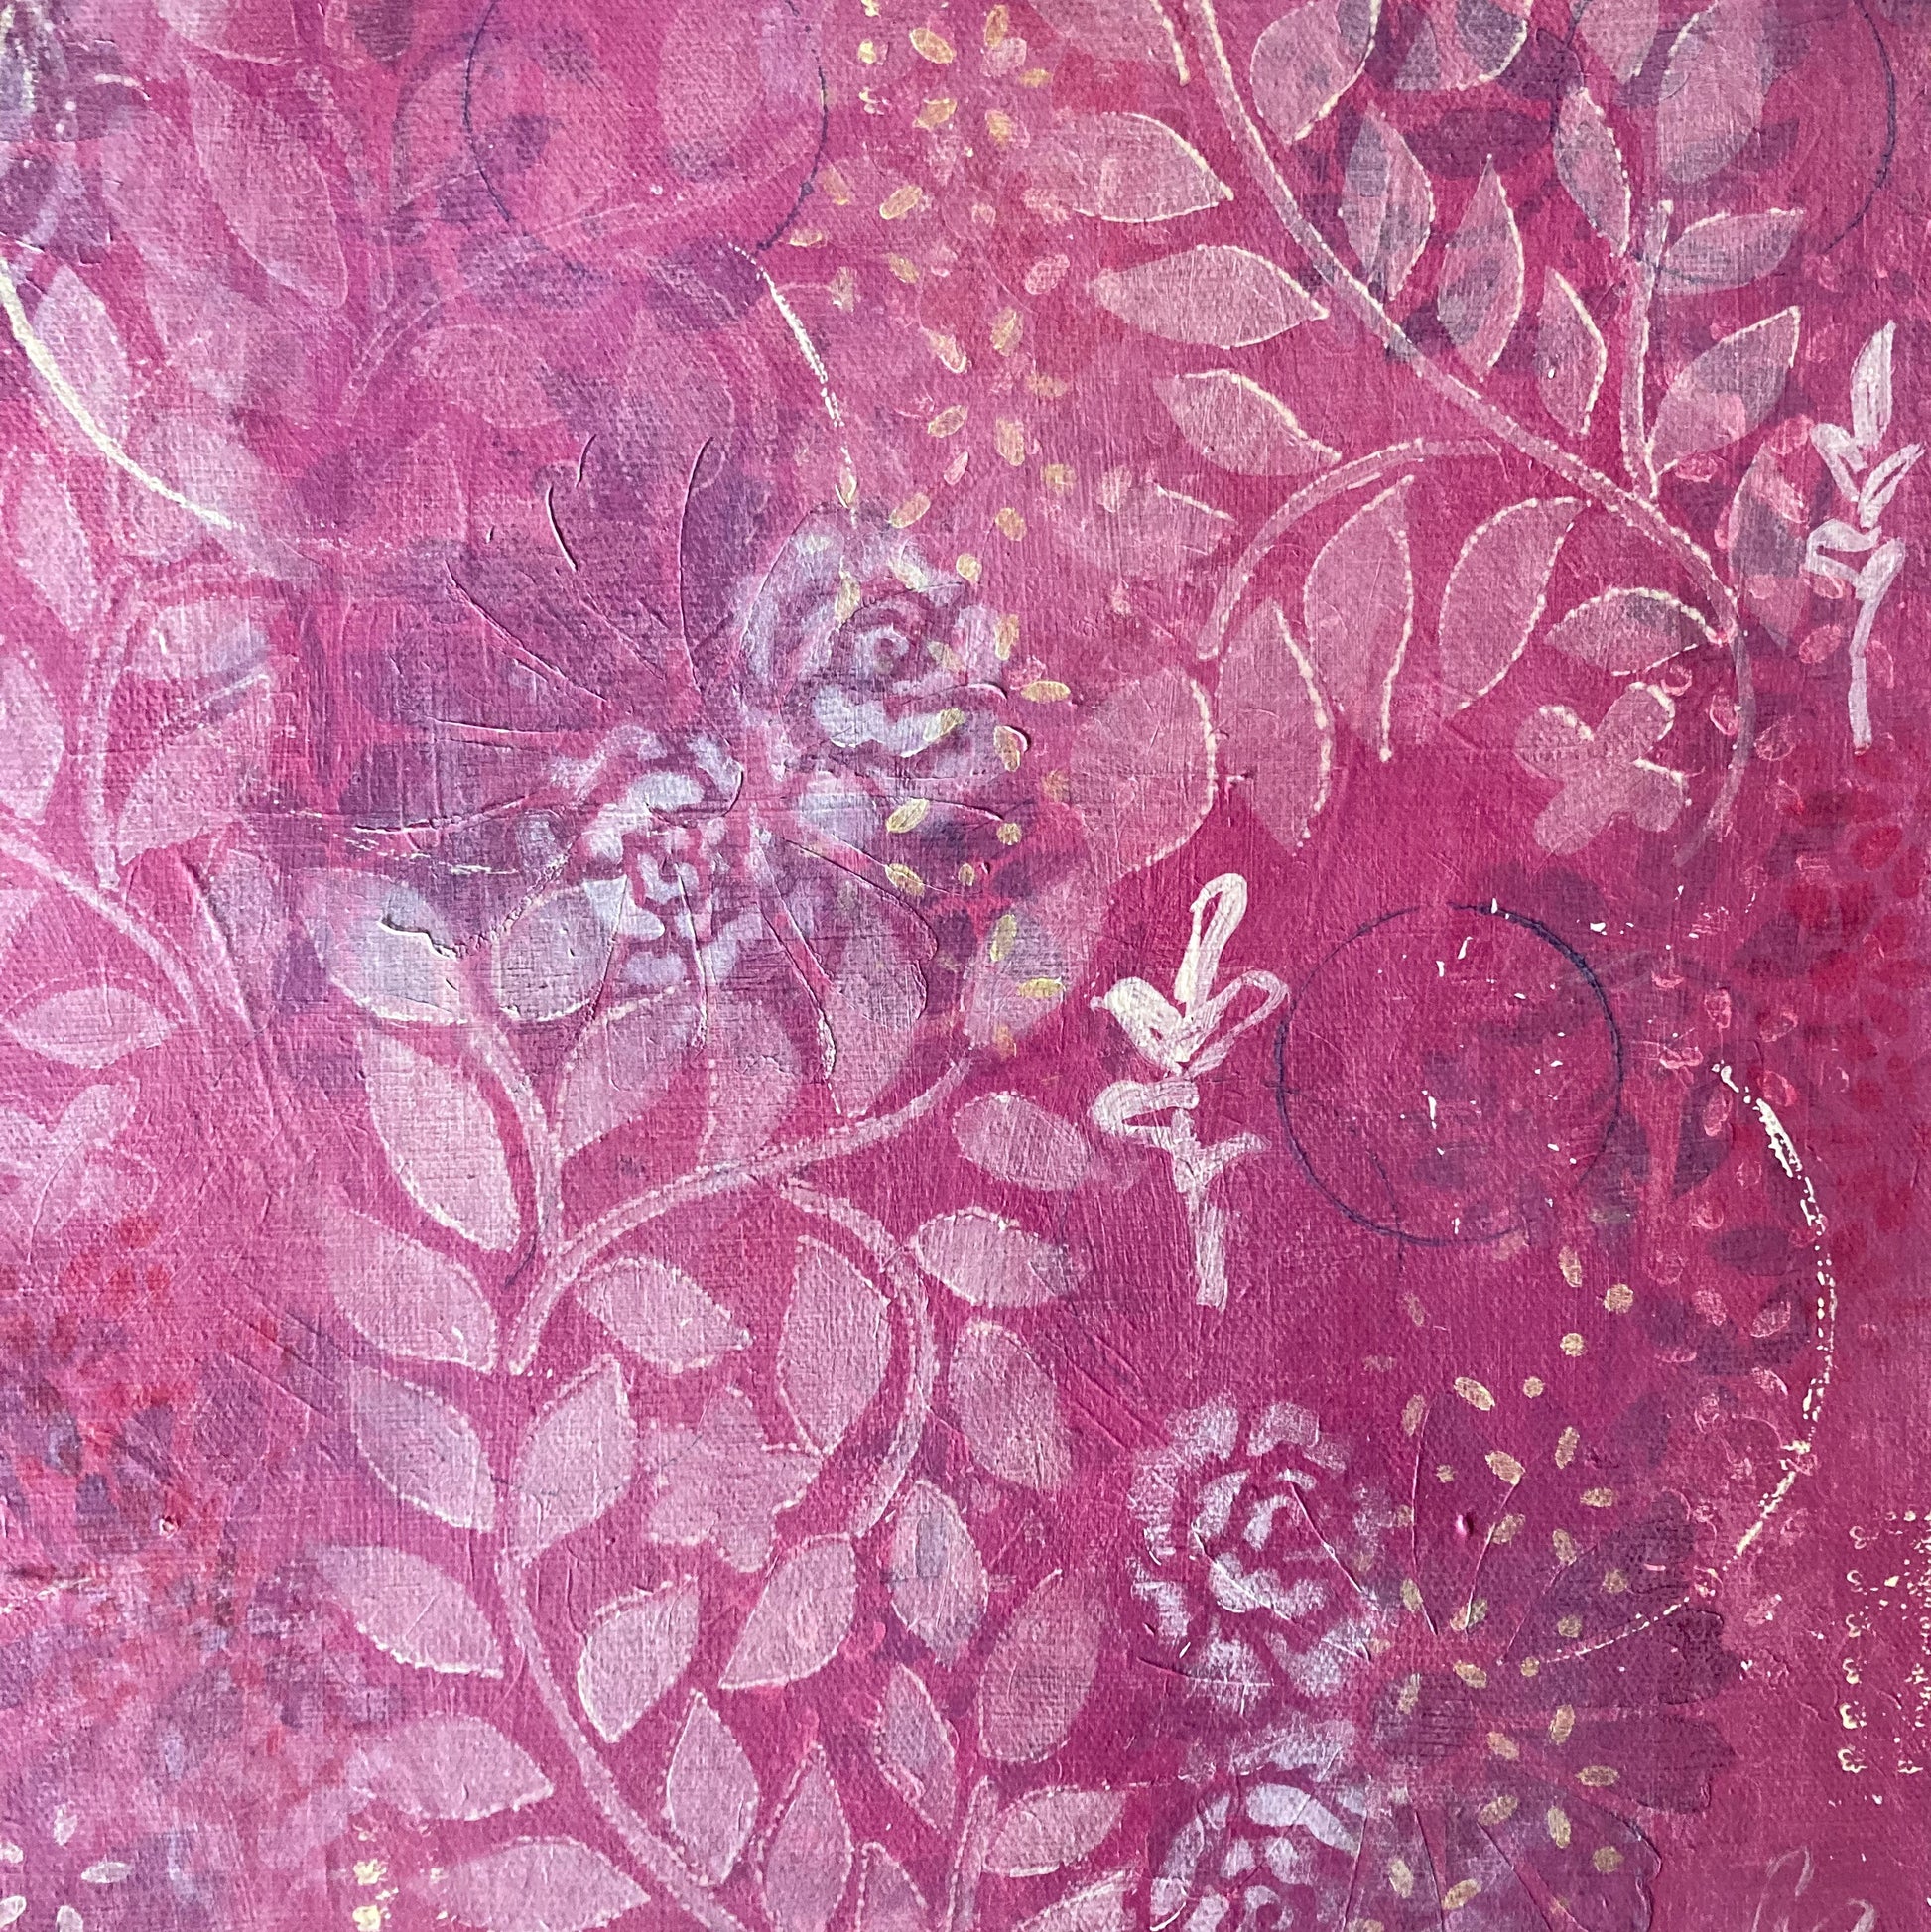 detail of original abstract painting with warm pink background white roses and leaf prints dark flowers layered underneath emits warm feeling of love